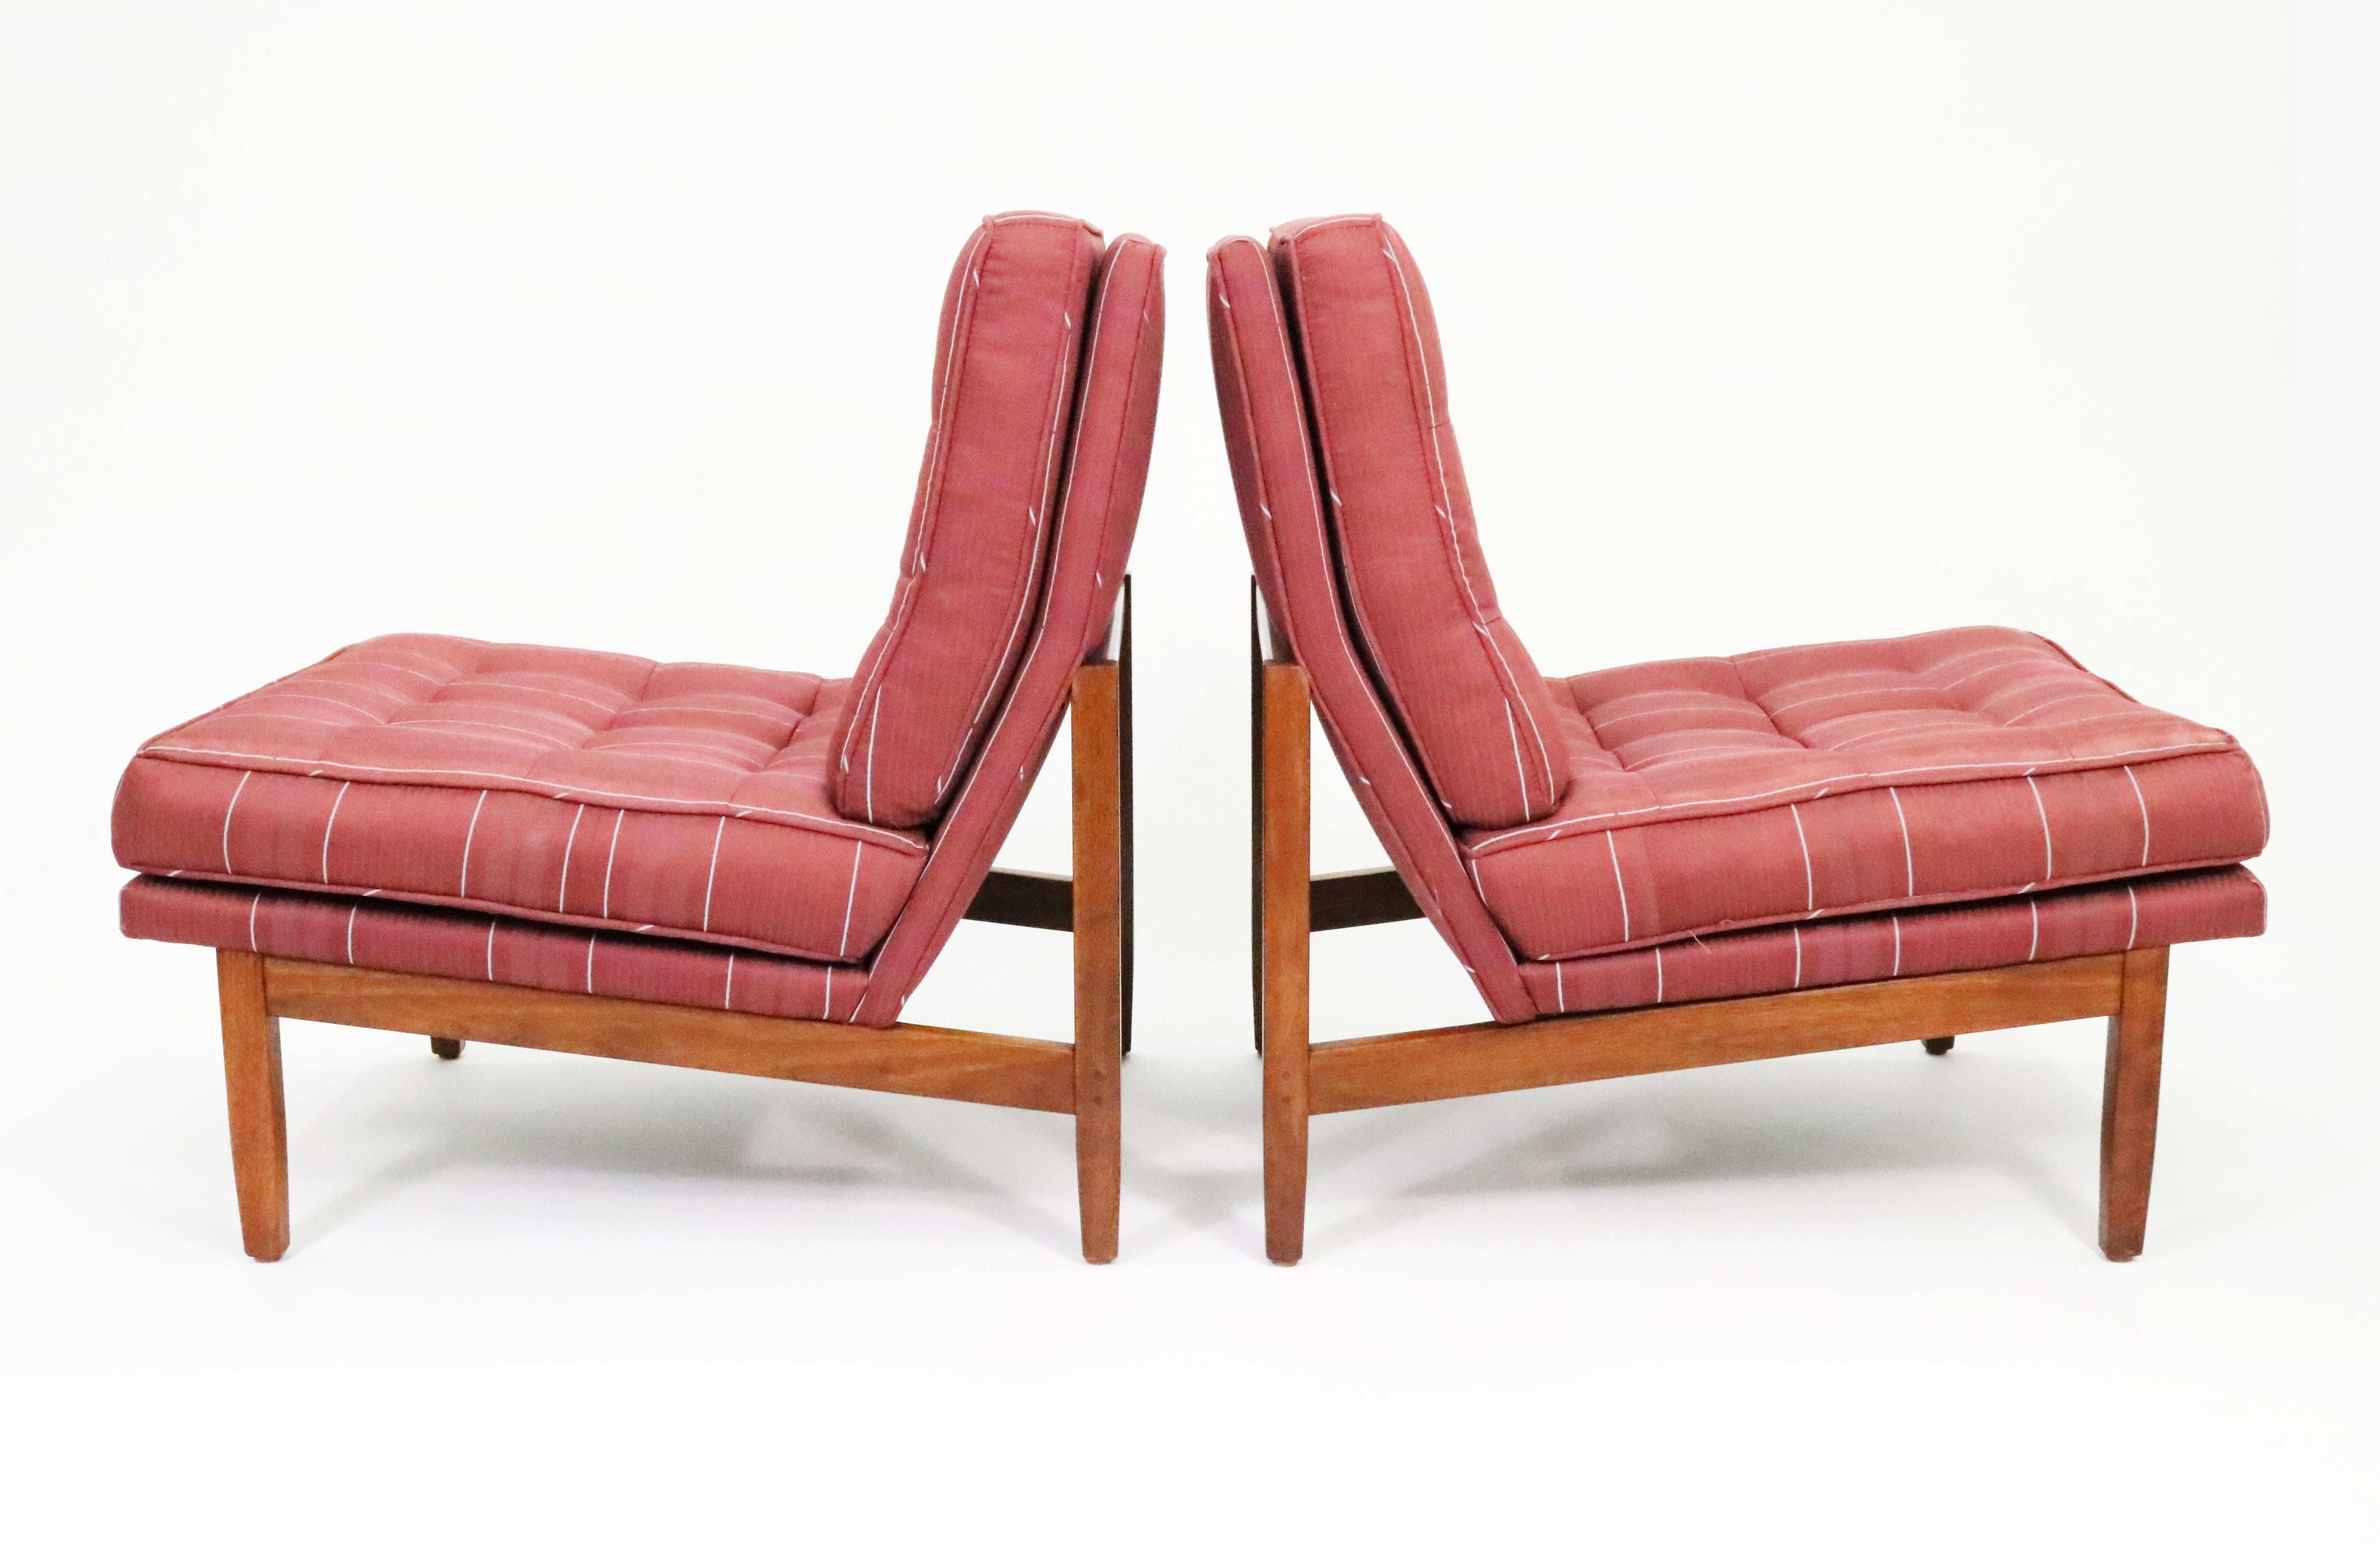 A pair of Florence Knoll's model 51W slipper lounge chairs - a brilliant take on her own metal frame parallel bar chairs executed in beautiful, richly figured walnut.

These chairs were reupholstered in the 1980s and are in need of new cushion